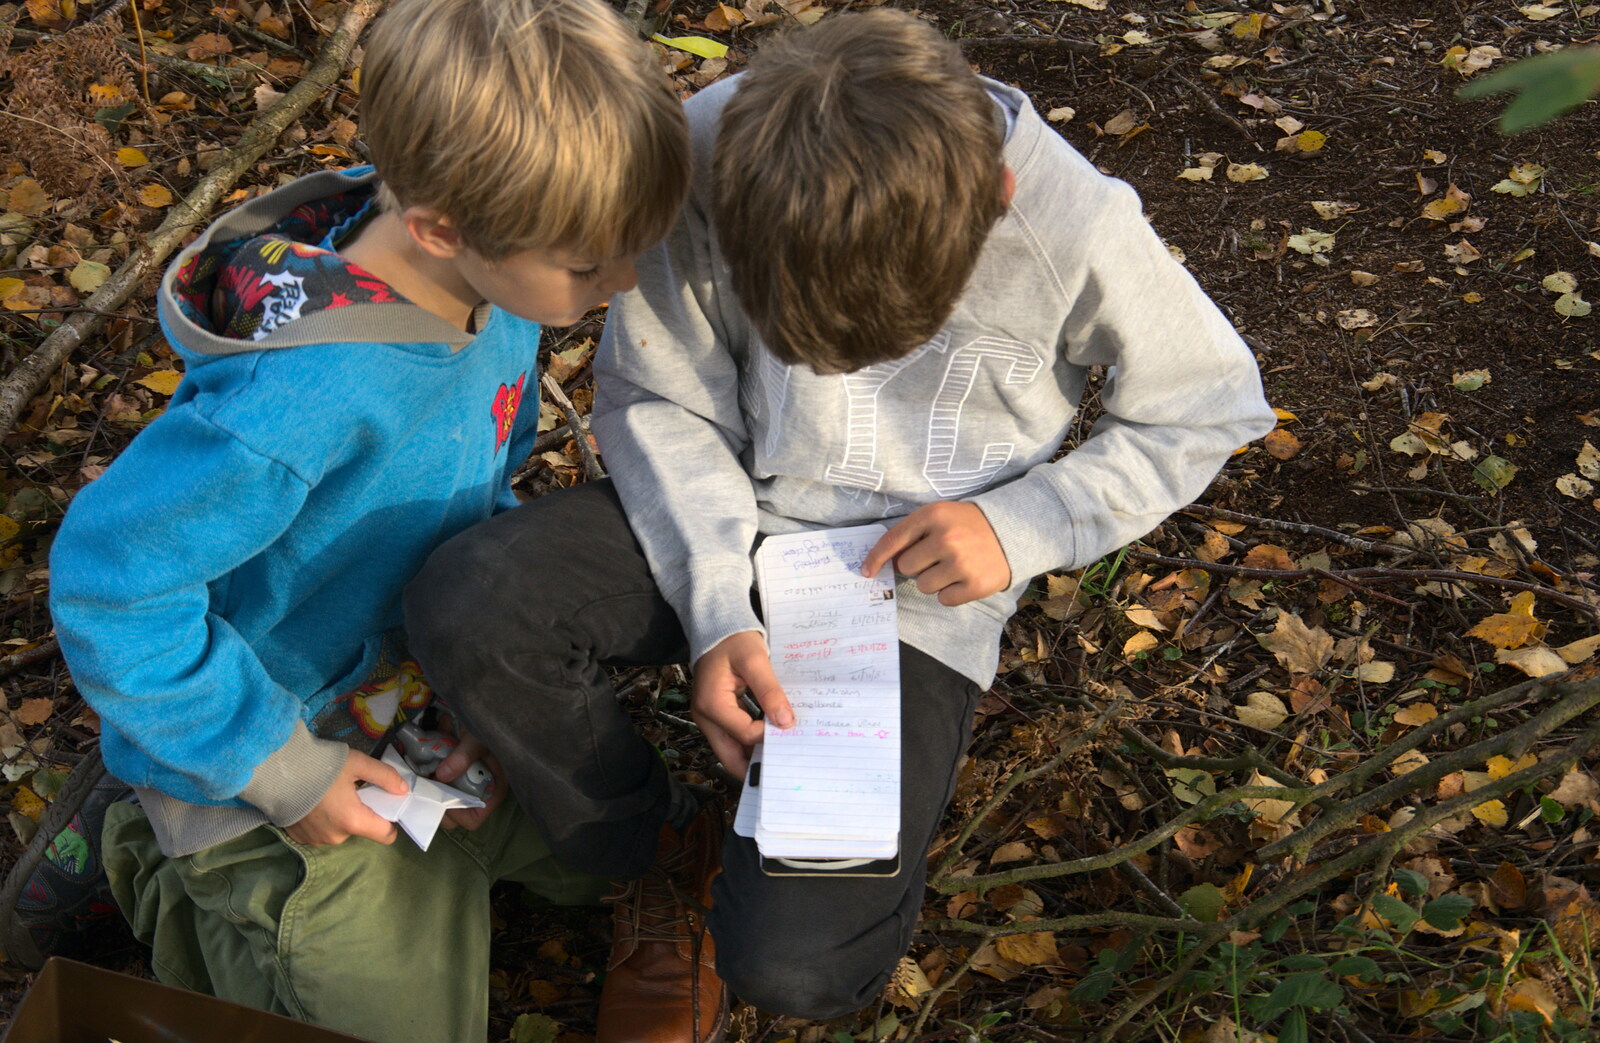 The boys read a listof messages from Evidence of Autumn: Geocaching on Knettishall Heath, Suffolk - 7th October 2018